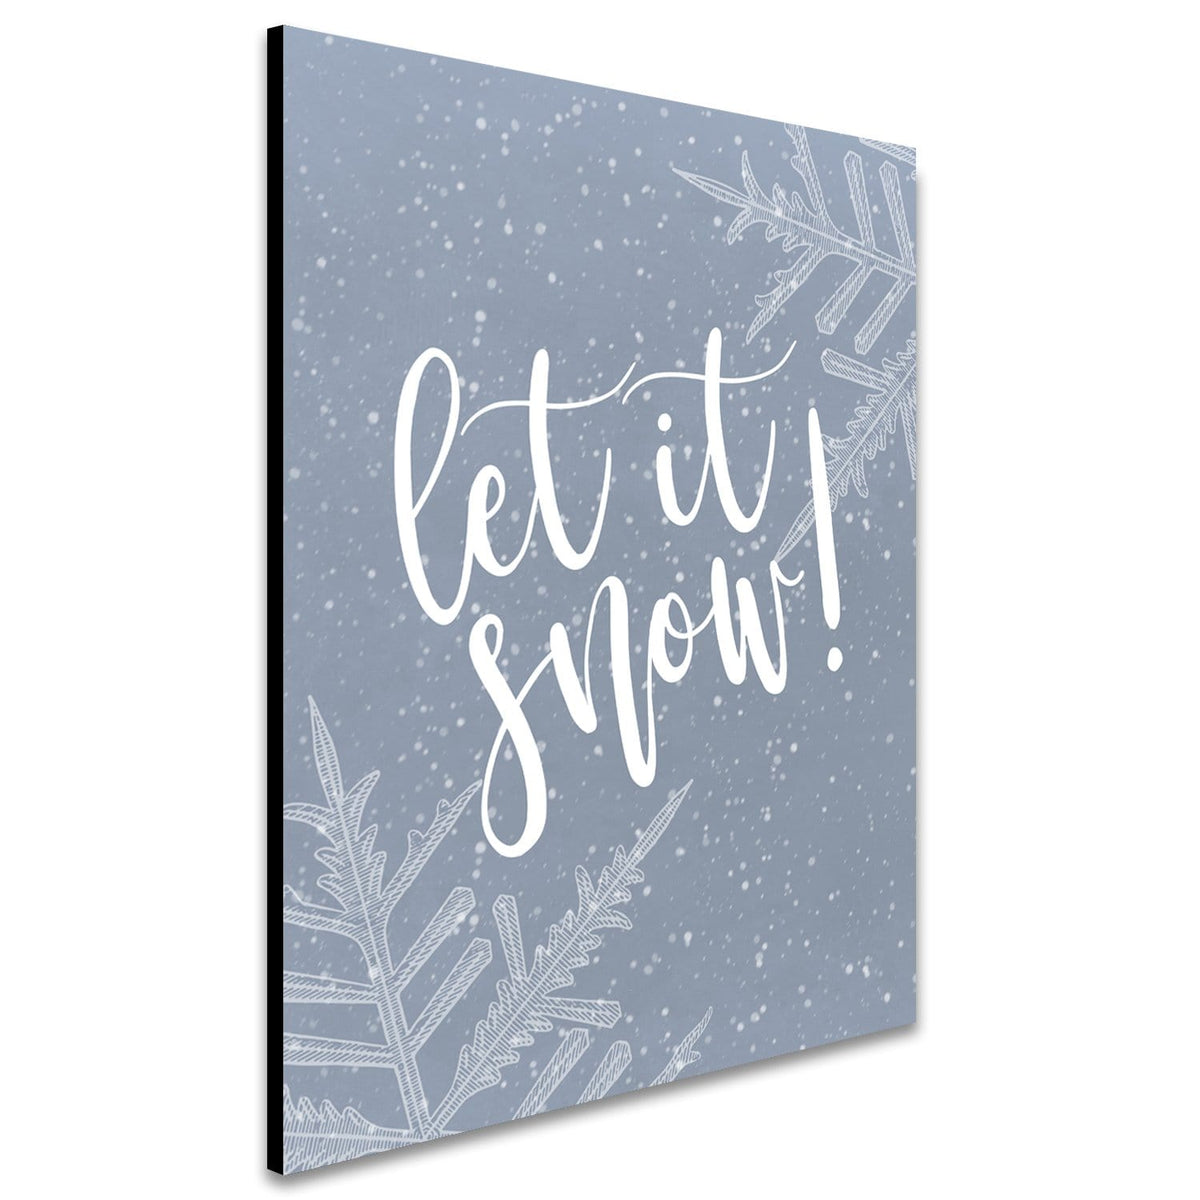 Let it Snow sign from Personal Prints